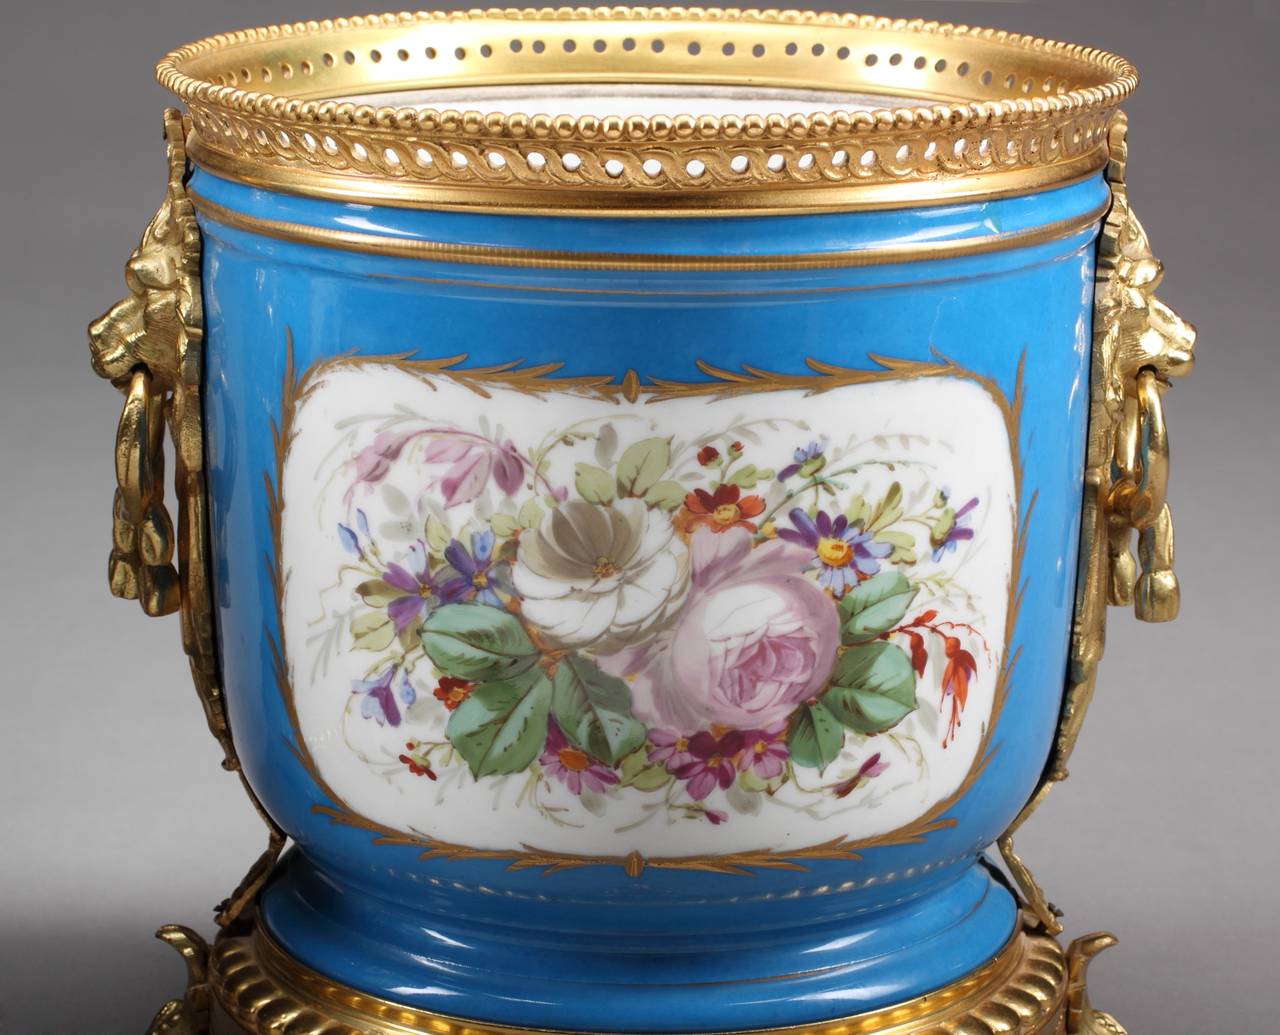 19th Century Pair of French Sevres Style Hand-Painted Porcelain Gilt Bronze Mounted Planters